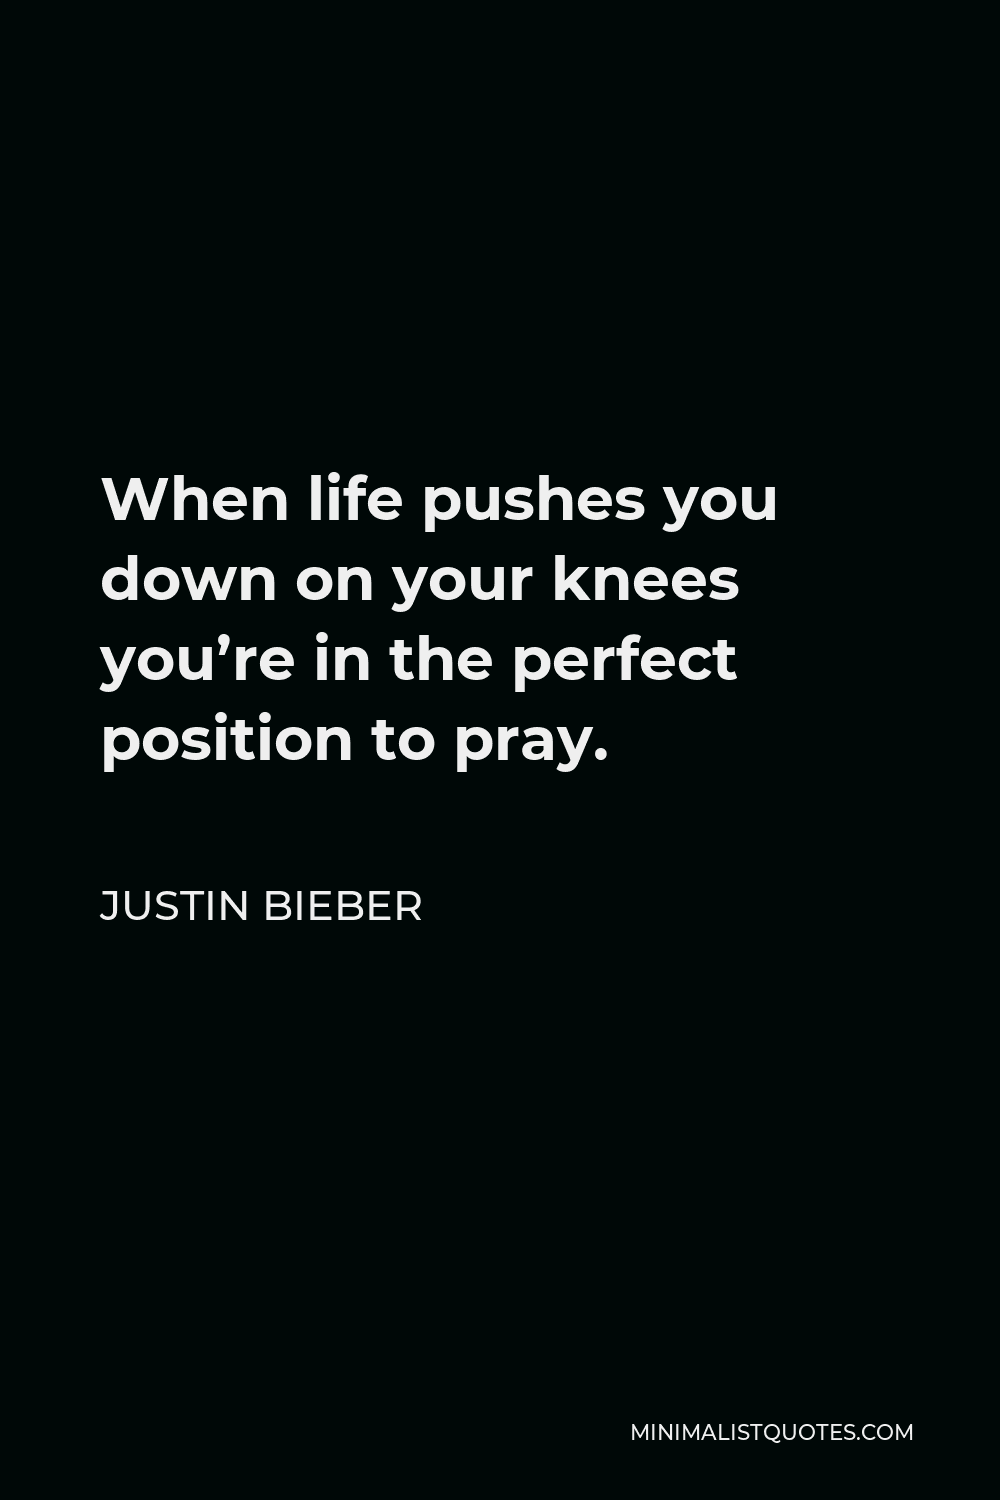 Justin Bieber Quote - When life pushes you down on your knees you’re in the perfect position to pray.